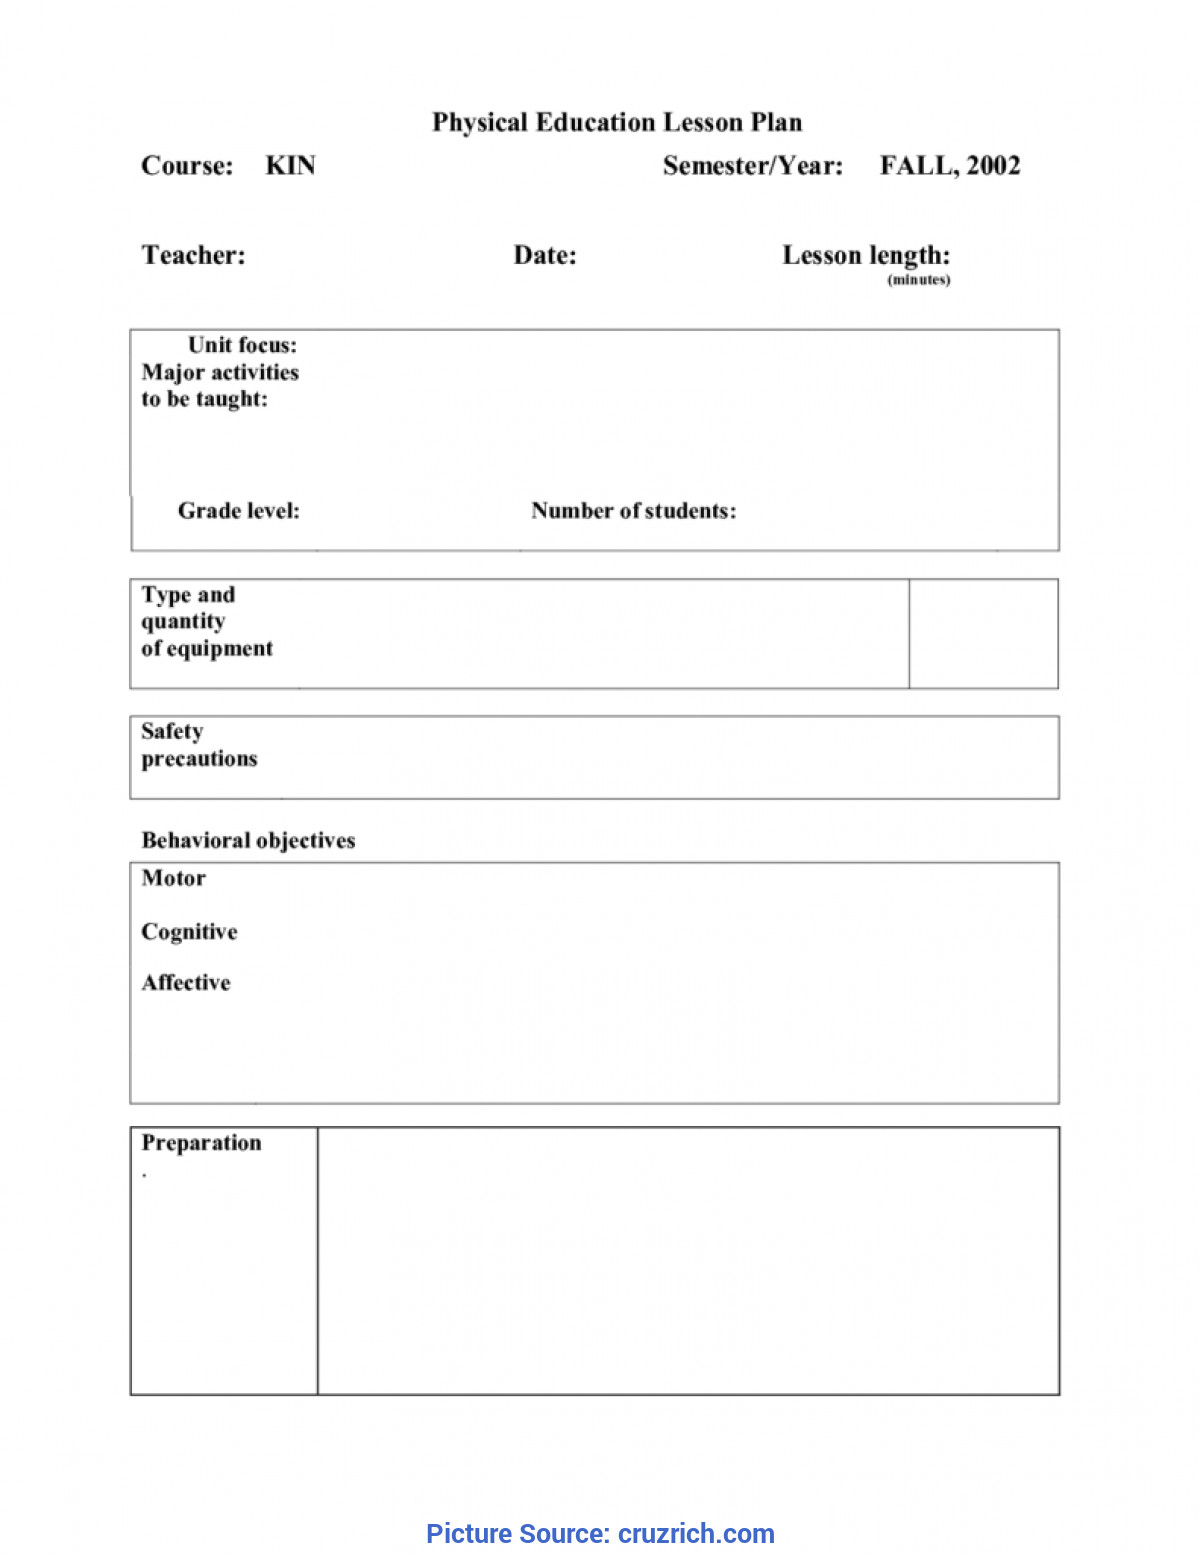 Edtpa Lesson Plan Template Valuable Edtpa Lesson Plan Template Physical Education